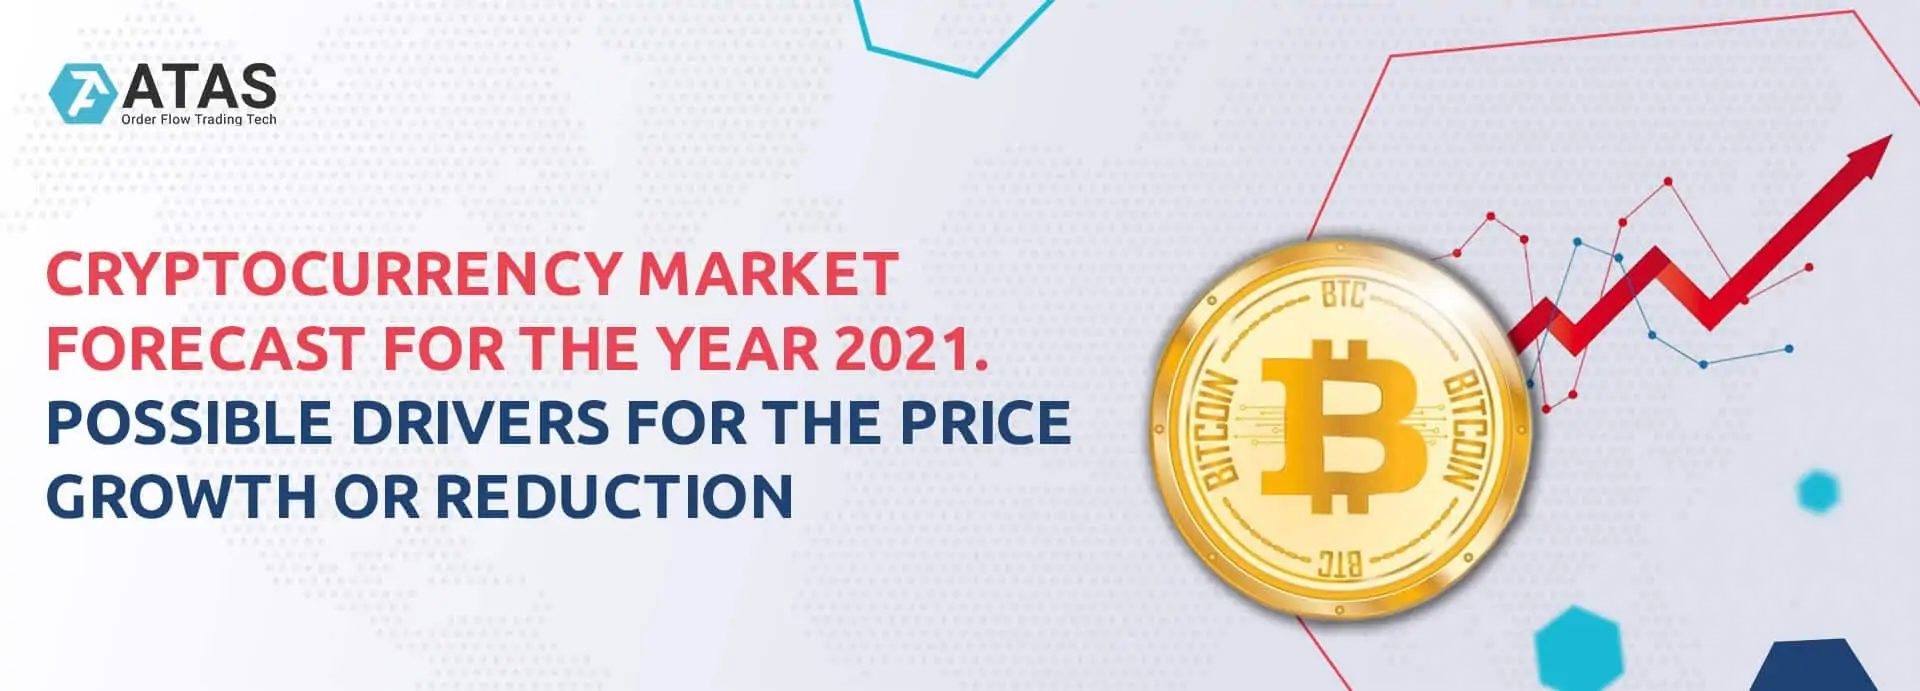 Cryptocurrency market forecast for the year 2021. Possible drivers for the price growth or reduction